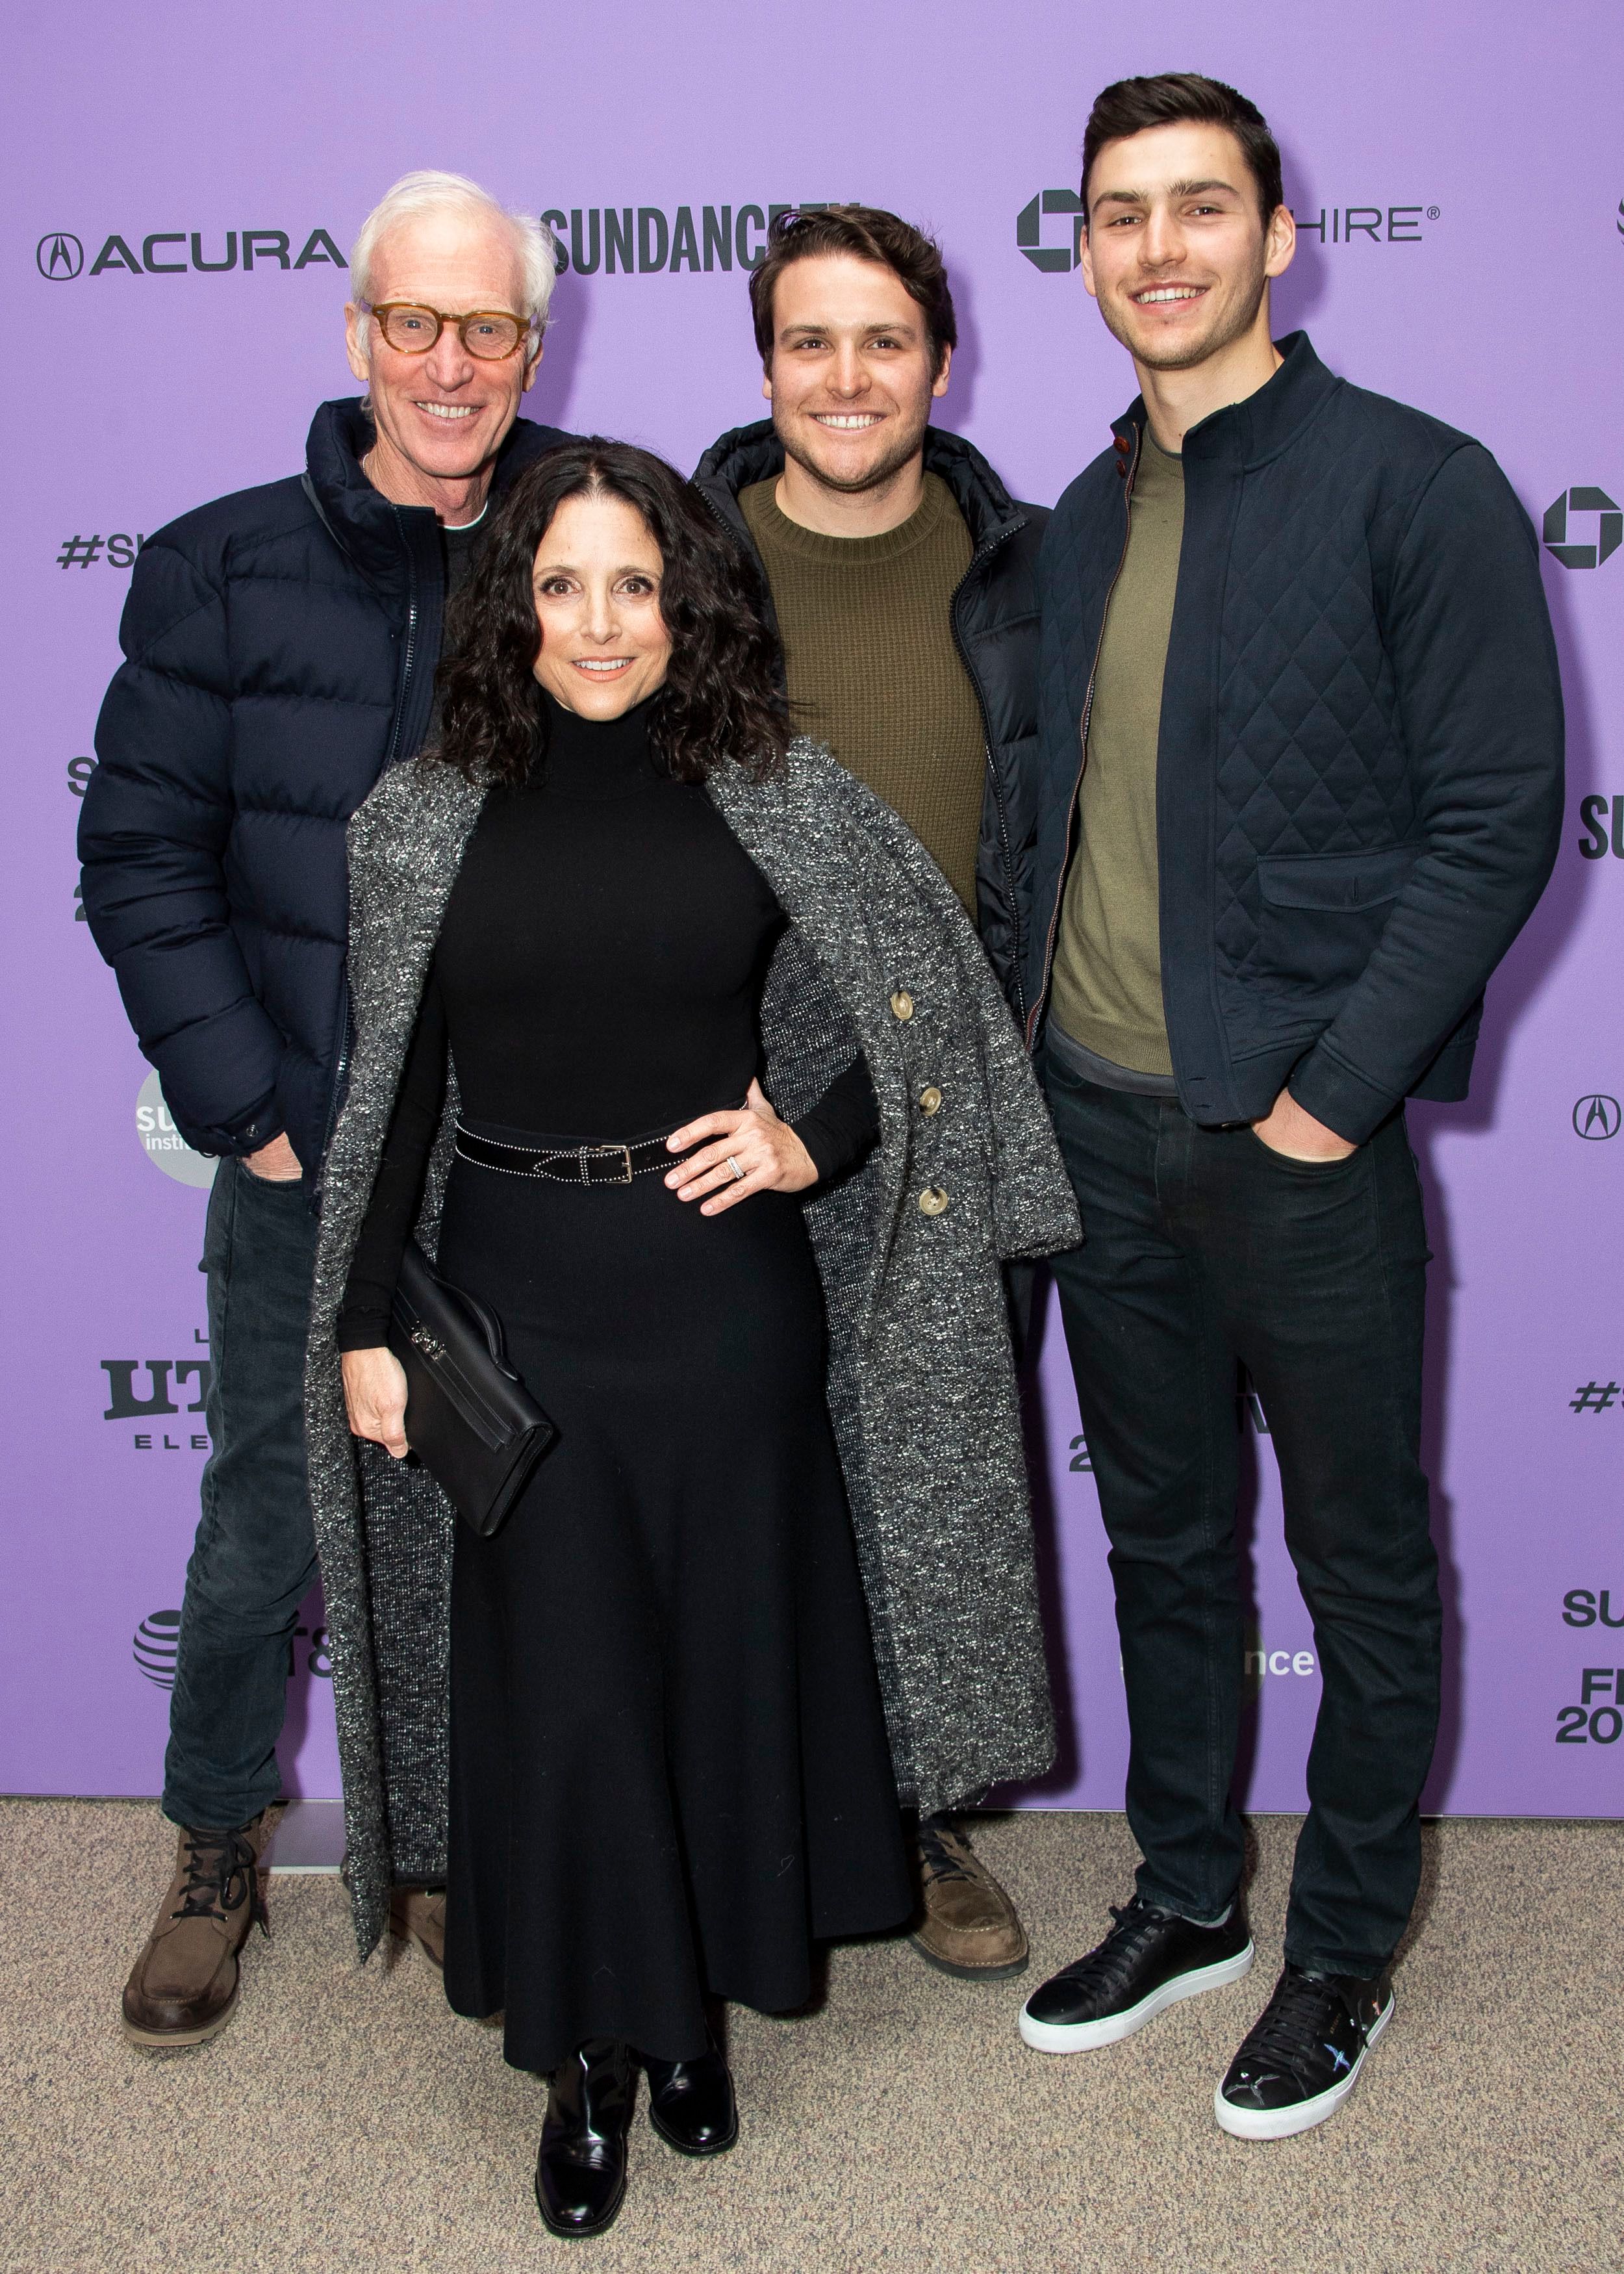 <p><a href="https://www.wonderwall.com/celebrity/profiles/overview/julia-louis-dreyfus-1190.article">Julia Louis-Dreyfus</a> and husband Brad Hall -- an actor, comedian, writer and former "Weekend Update" anchor on "Saturday Night Live" -- posed with their sons, musician Henry Hall (who was born in 1992) and Charlie Hall (who was born in 1997) at the premiere of "Downhill" during the 2020 Sundance Film Festival in Park City, Utah, on Jan. 26, 2020. Charlie -- a former basketball player at Northwestern University -- is now following in his parents' creative footsteps. In 2020, he wrote, directed and starred in the comedic web series <a href="https://www.youtube.com/watch?v=8lBkHD8_FRg">"Sorry, Charlie"</a> and in March 2021, he appeared as school mascot and pun-loving morning announcements student Bradley in Amy Poehler's Netflix film "Moxie."</p>